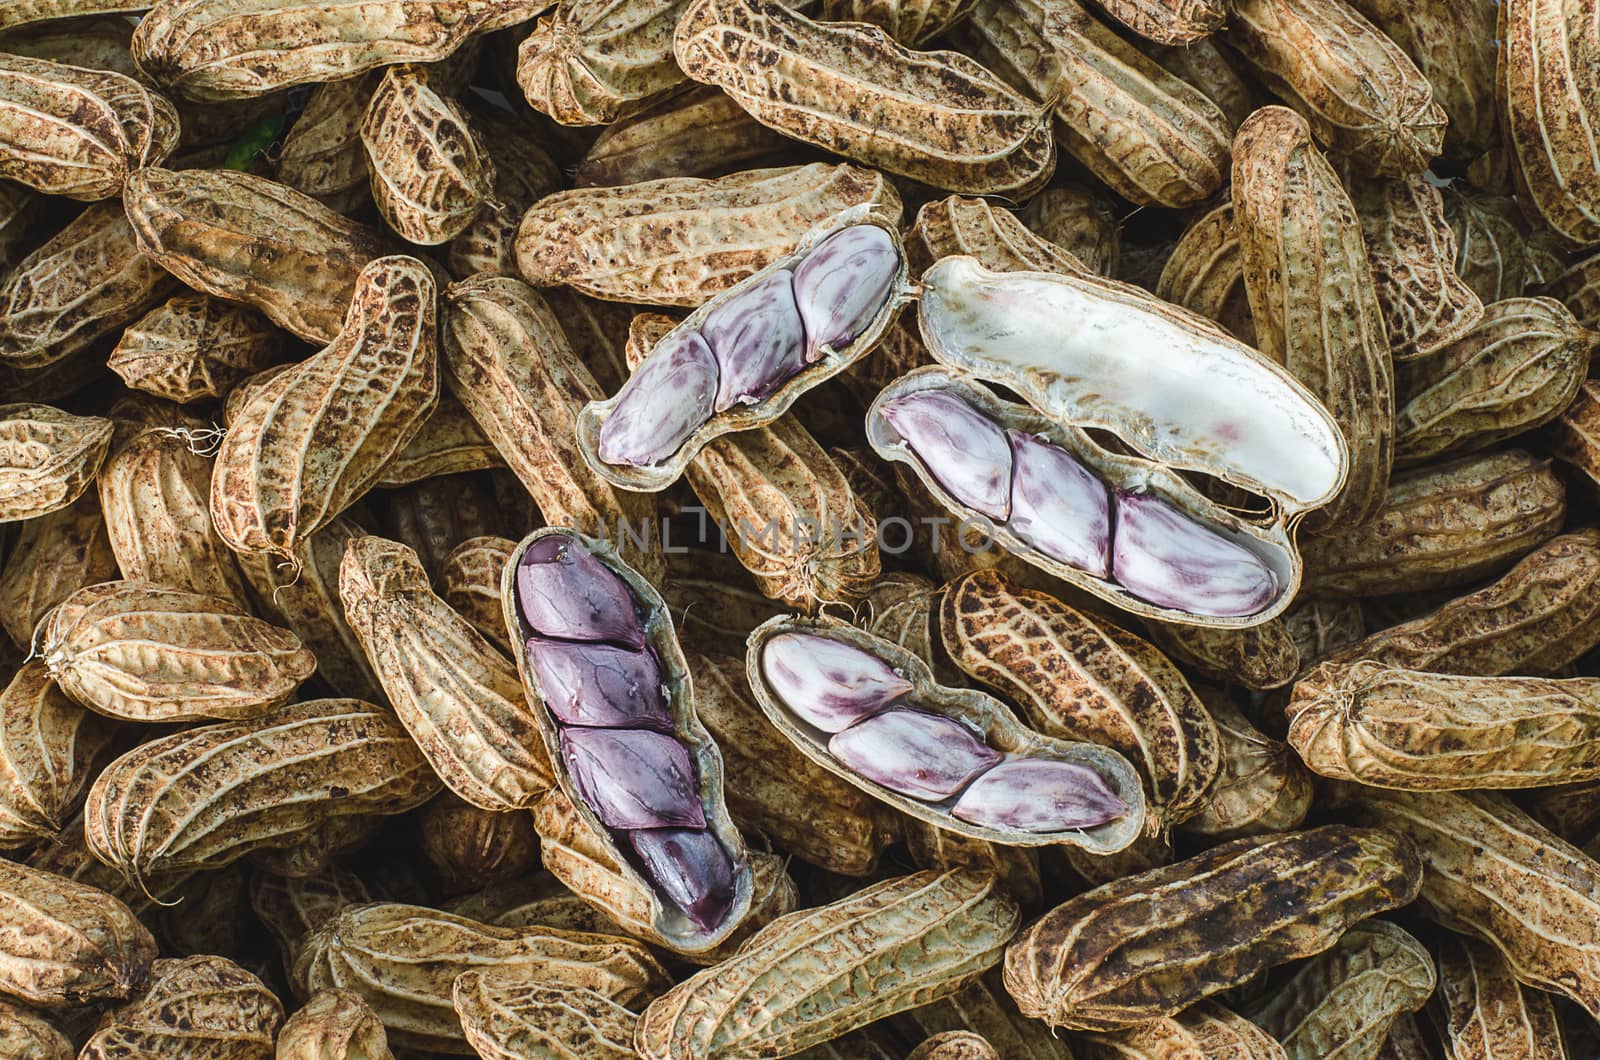 Peanuts in their shell to boil textured food background.